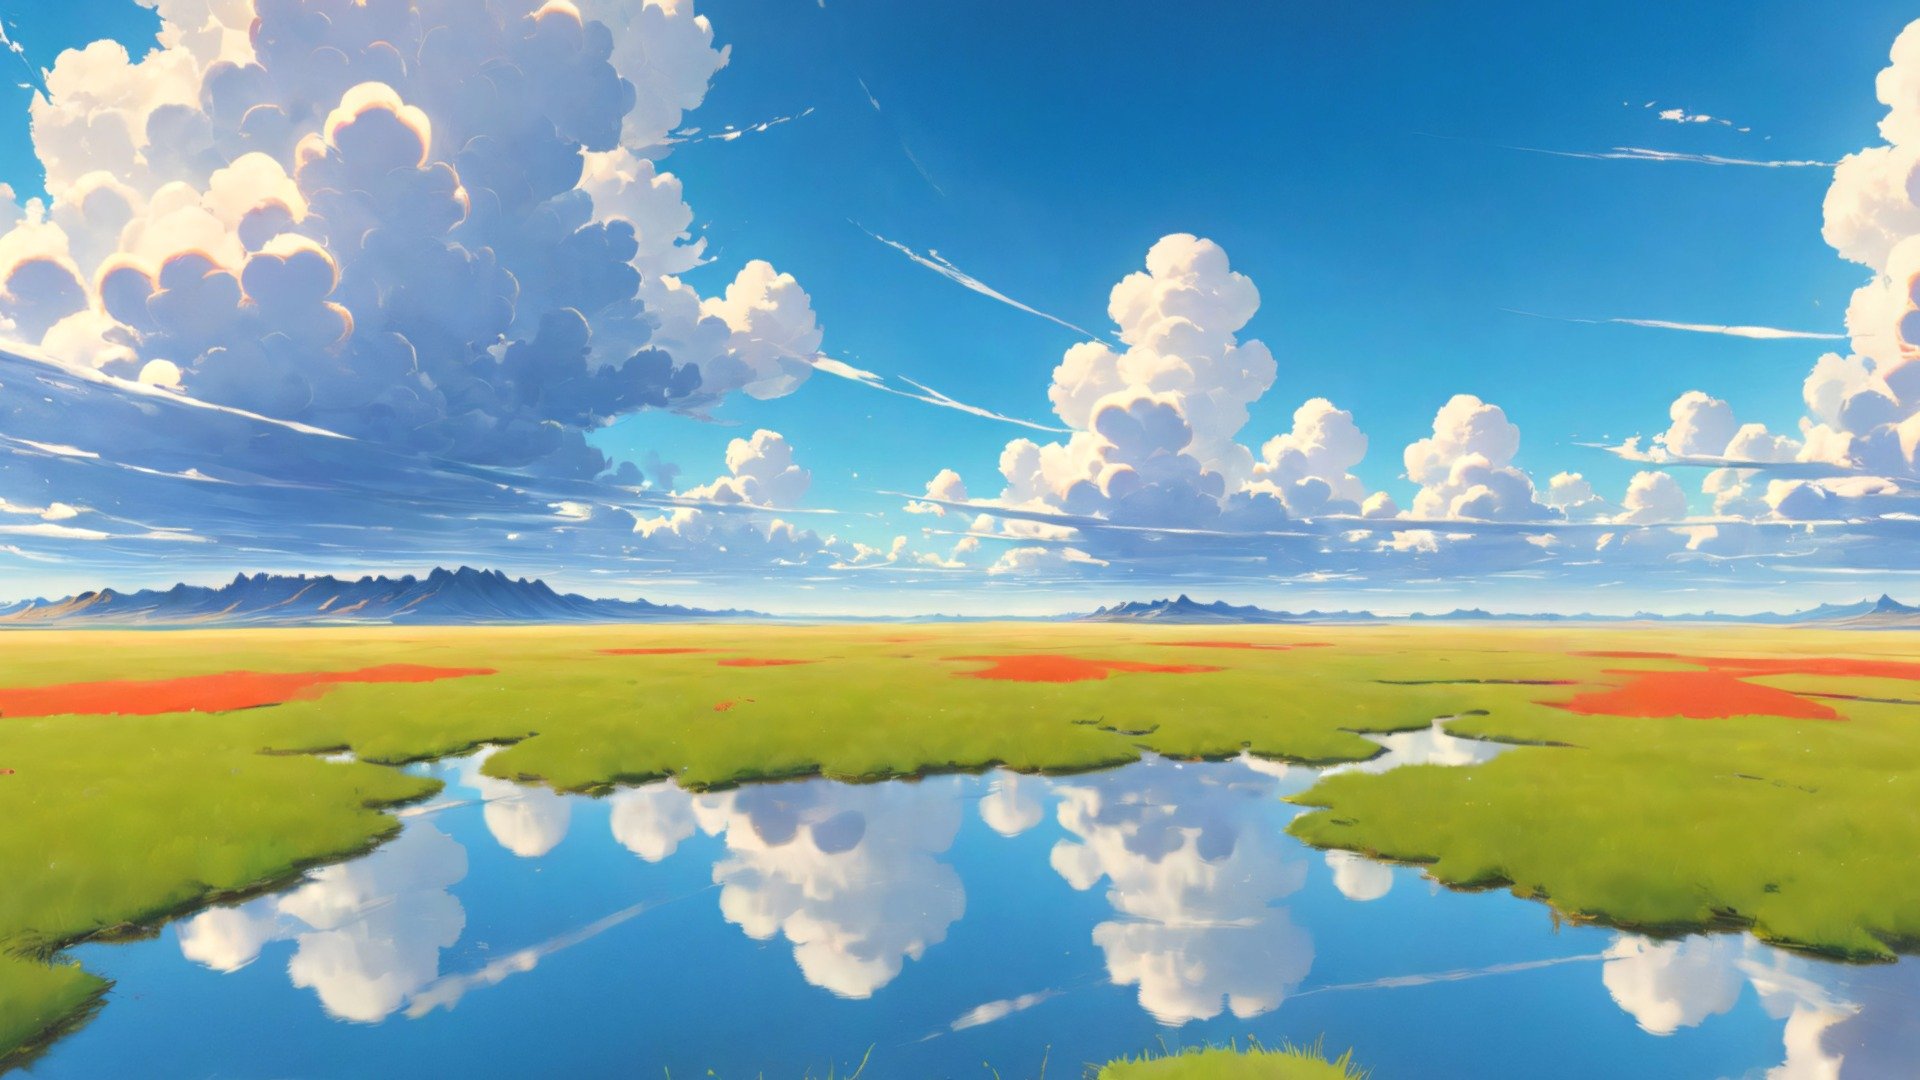 This is an 8k resolution (8192 x 4096) HDRI equirectangular panorama which will help you create 360 degrees ANIME / CARTOONY background in different 3d software (Blender, Unreal Engine, Unity, 3dMax and many others). It is perfect for games, virtual reality, 3d renders, movies etc. The image was created with AI and edited in different 2d and 3d software to improve quality, remove seams and make it perfect for any 3d or 2d ANIME / CARTOON / STYLIZED project.

The image comes in 2 formats: .hdr and .jpg - HDRI Anime Panorama K - Buy Royalty Free 3D model by Ionut81 3d model